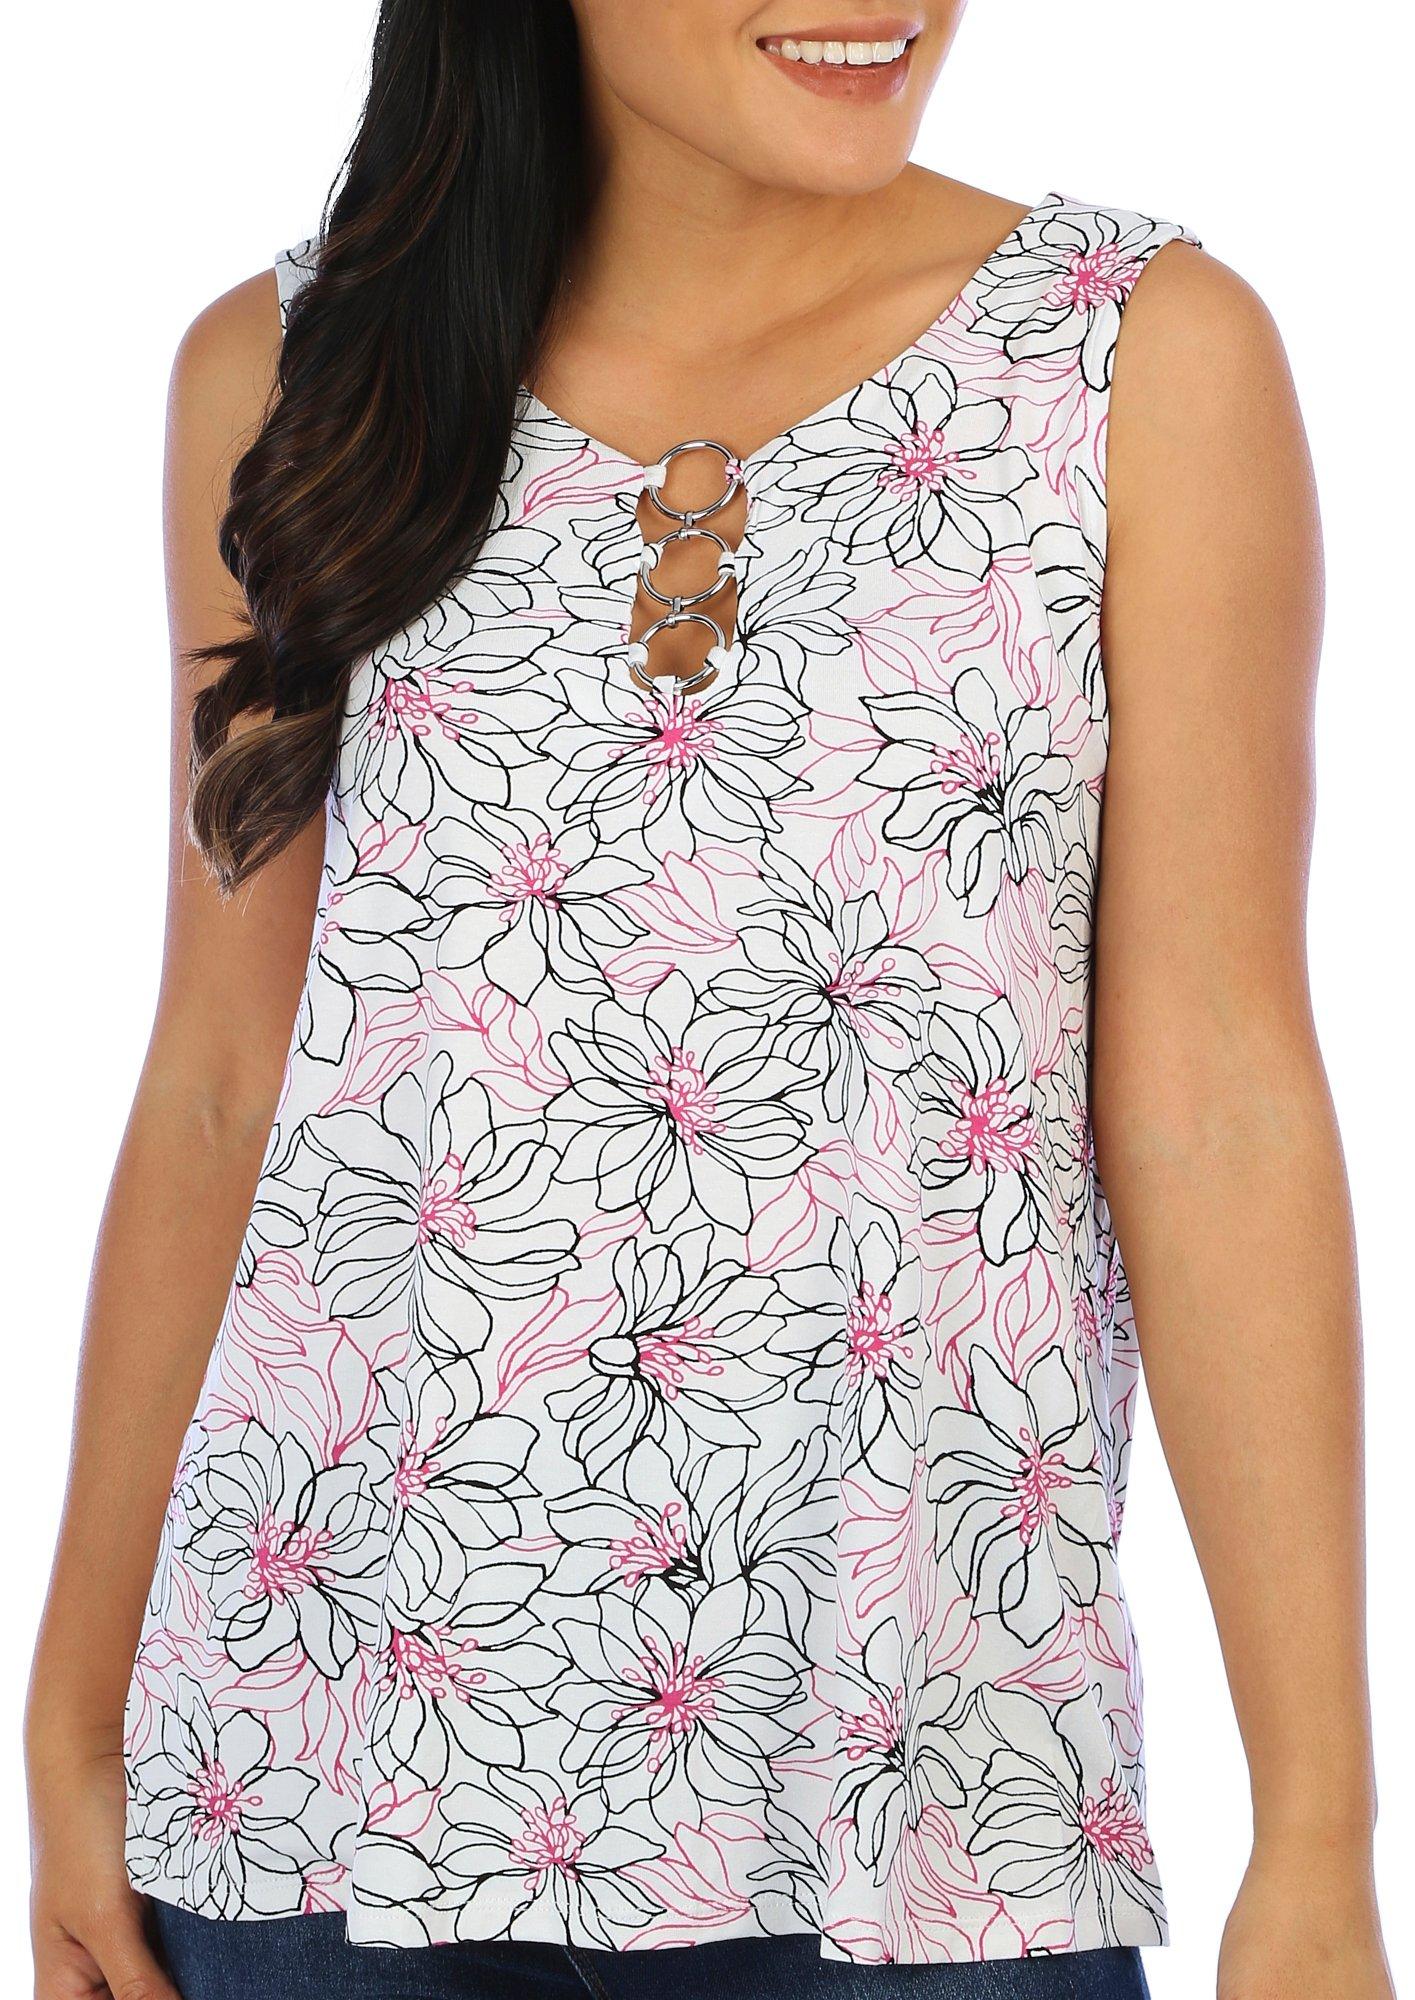 Juniper + Lime Womens Floral O-Ring Keyhole Sleeveless Top